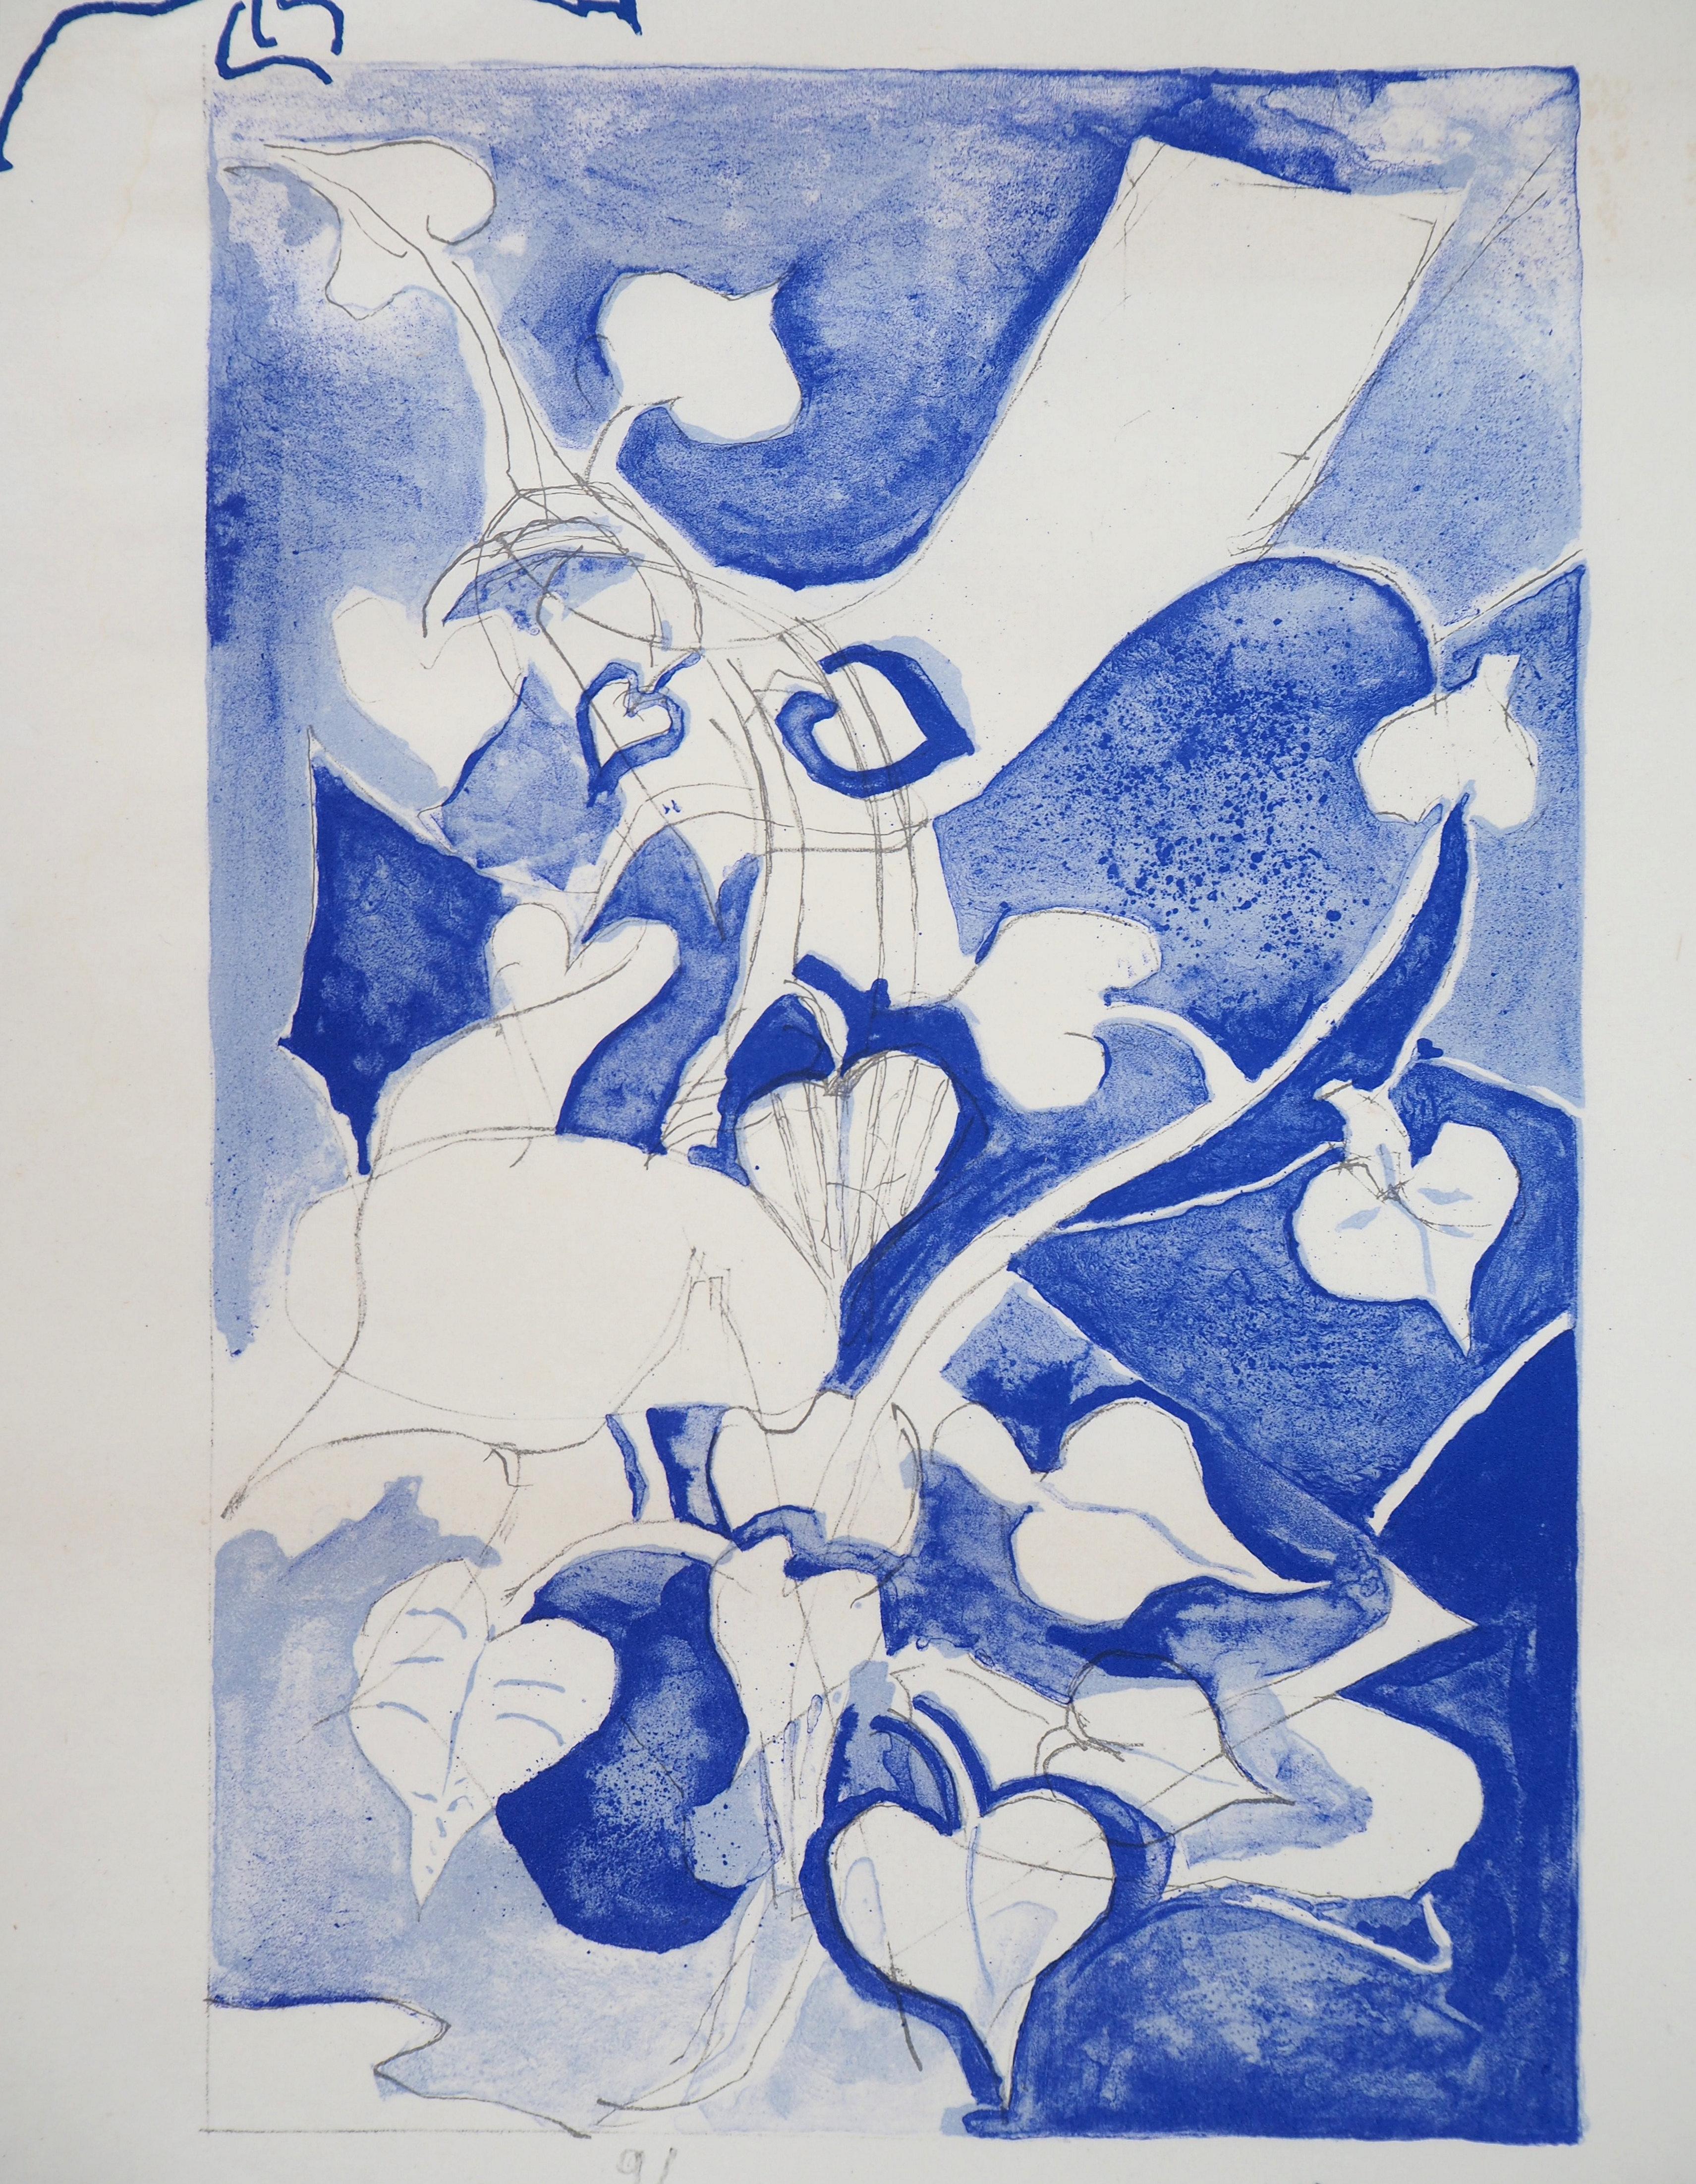 Garden in Blossom - Original lithograph, hand signed (Mourlot) - Modern Print by Georges Braque